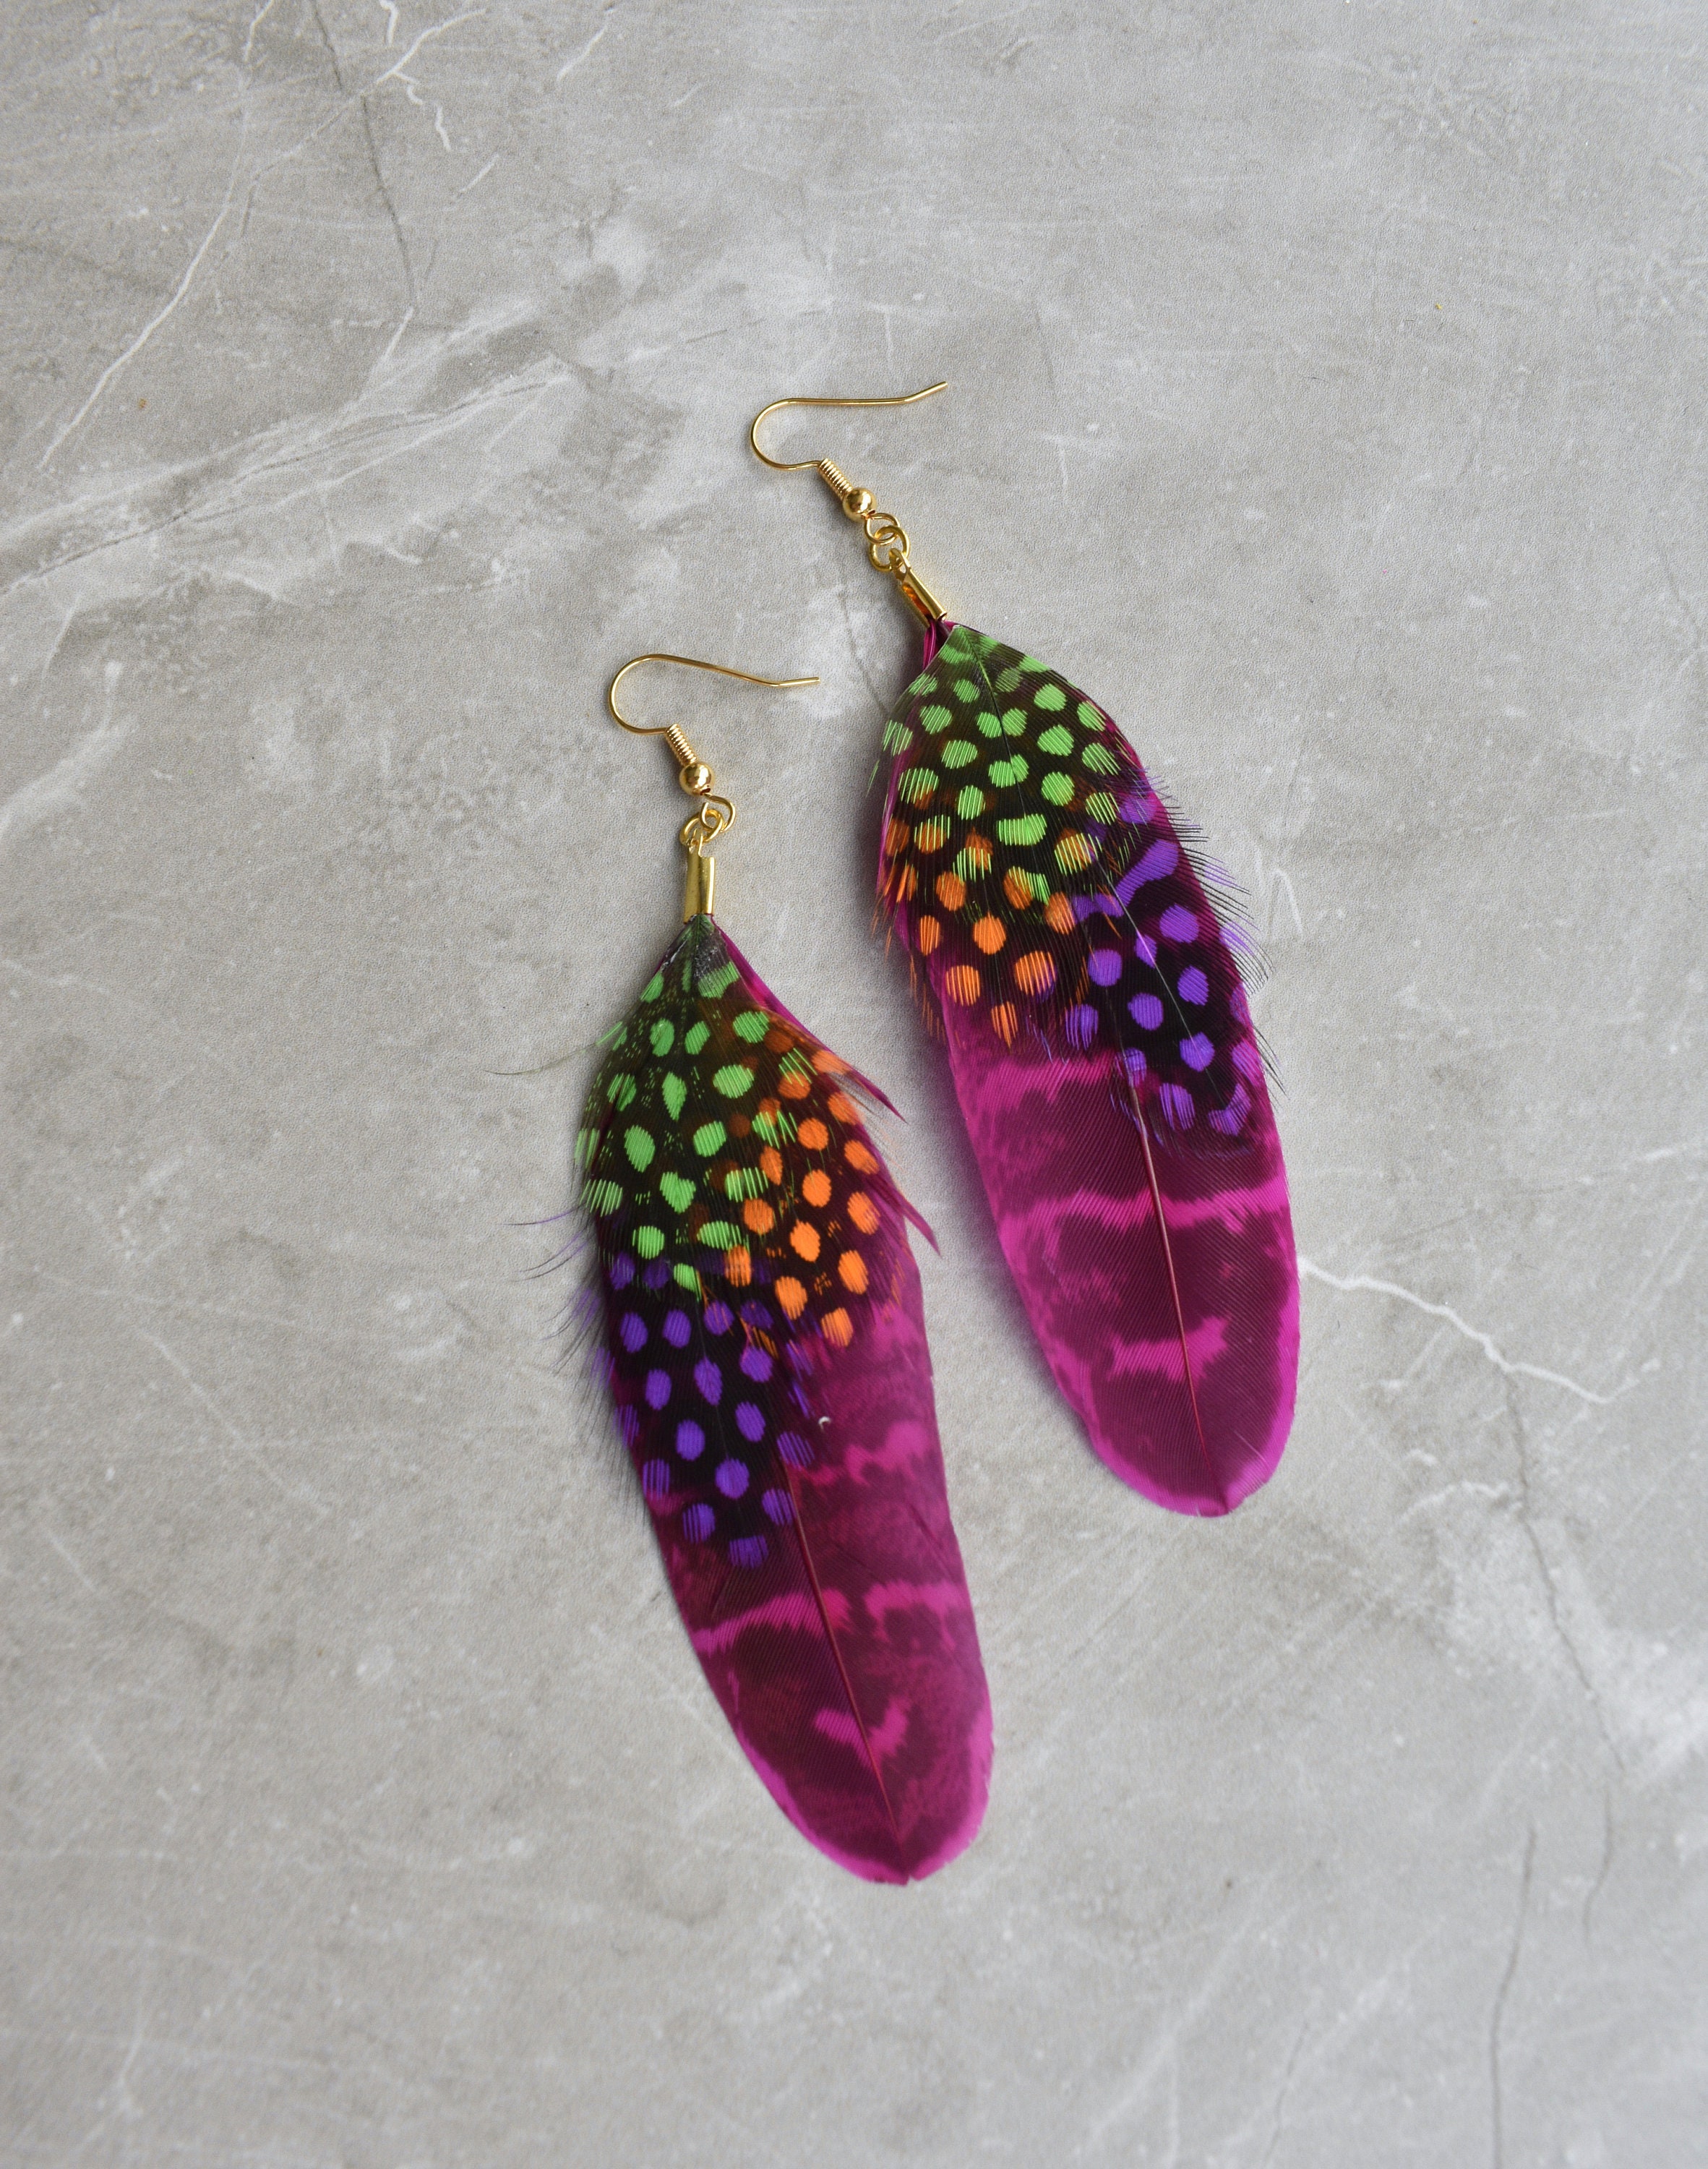 Vintage Rose Leather Feather Earrings (4 sizes) – Inspired by Jenna